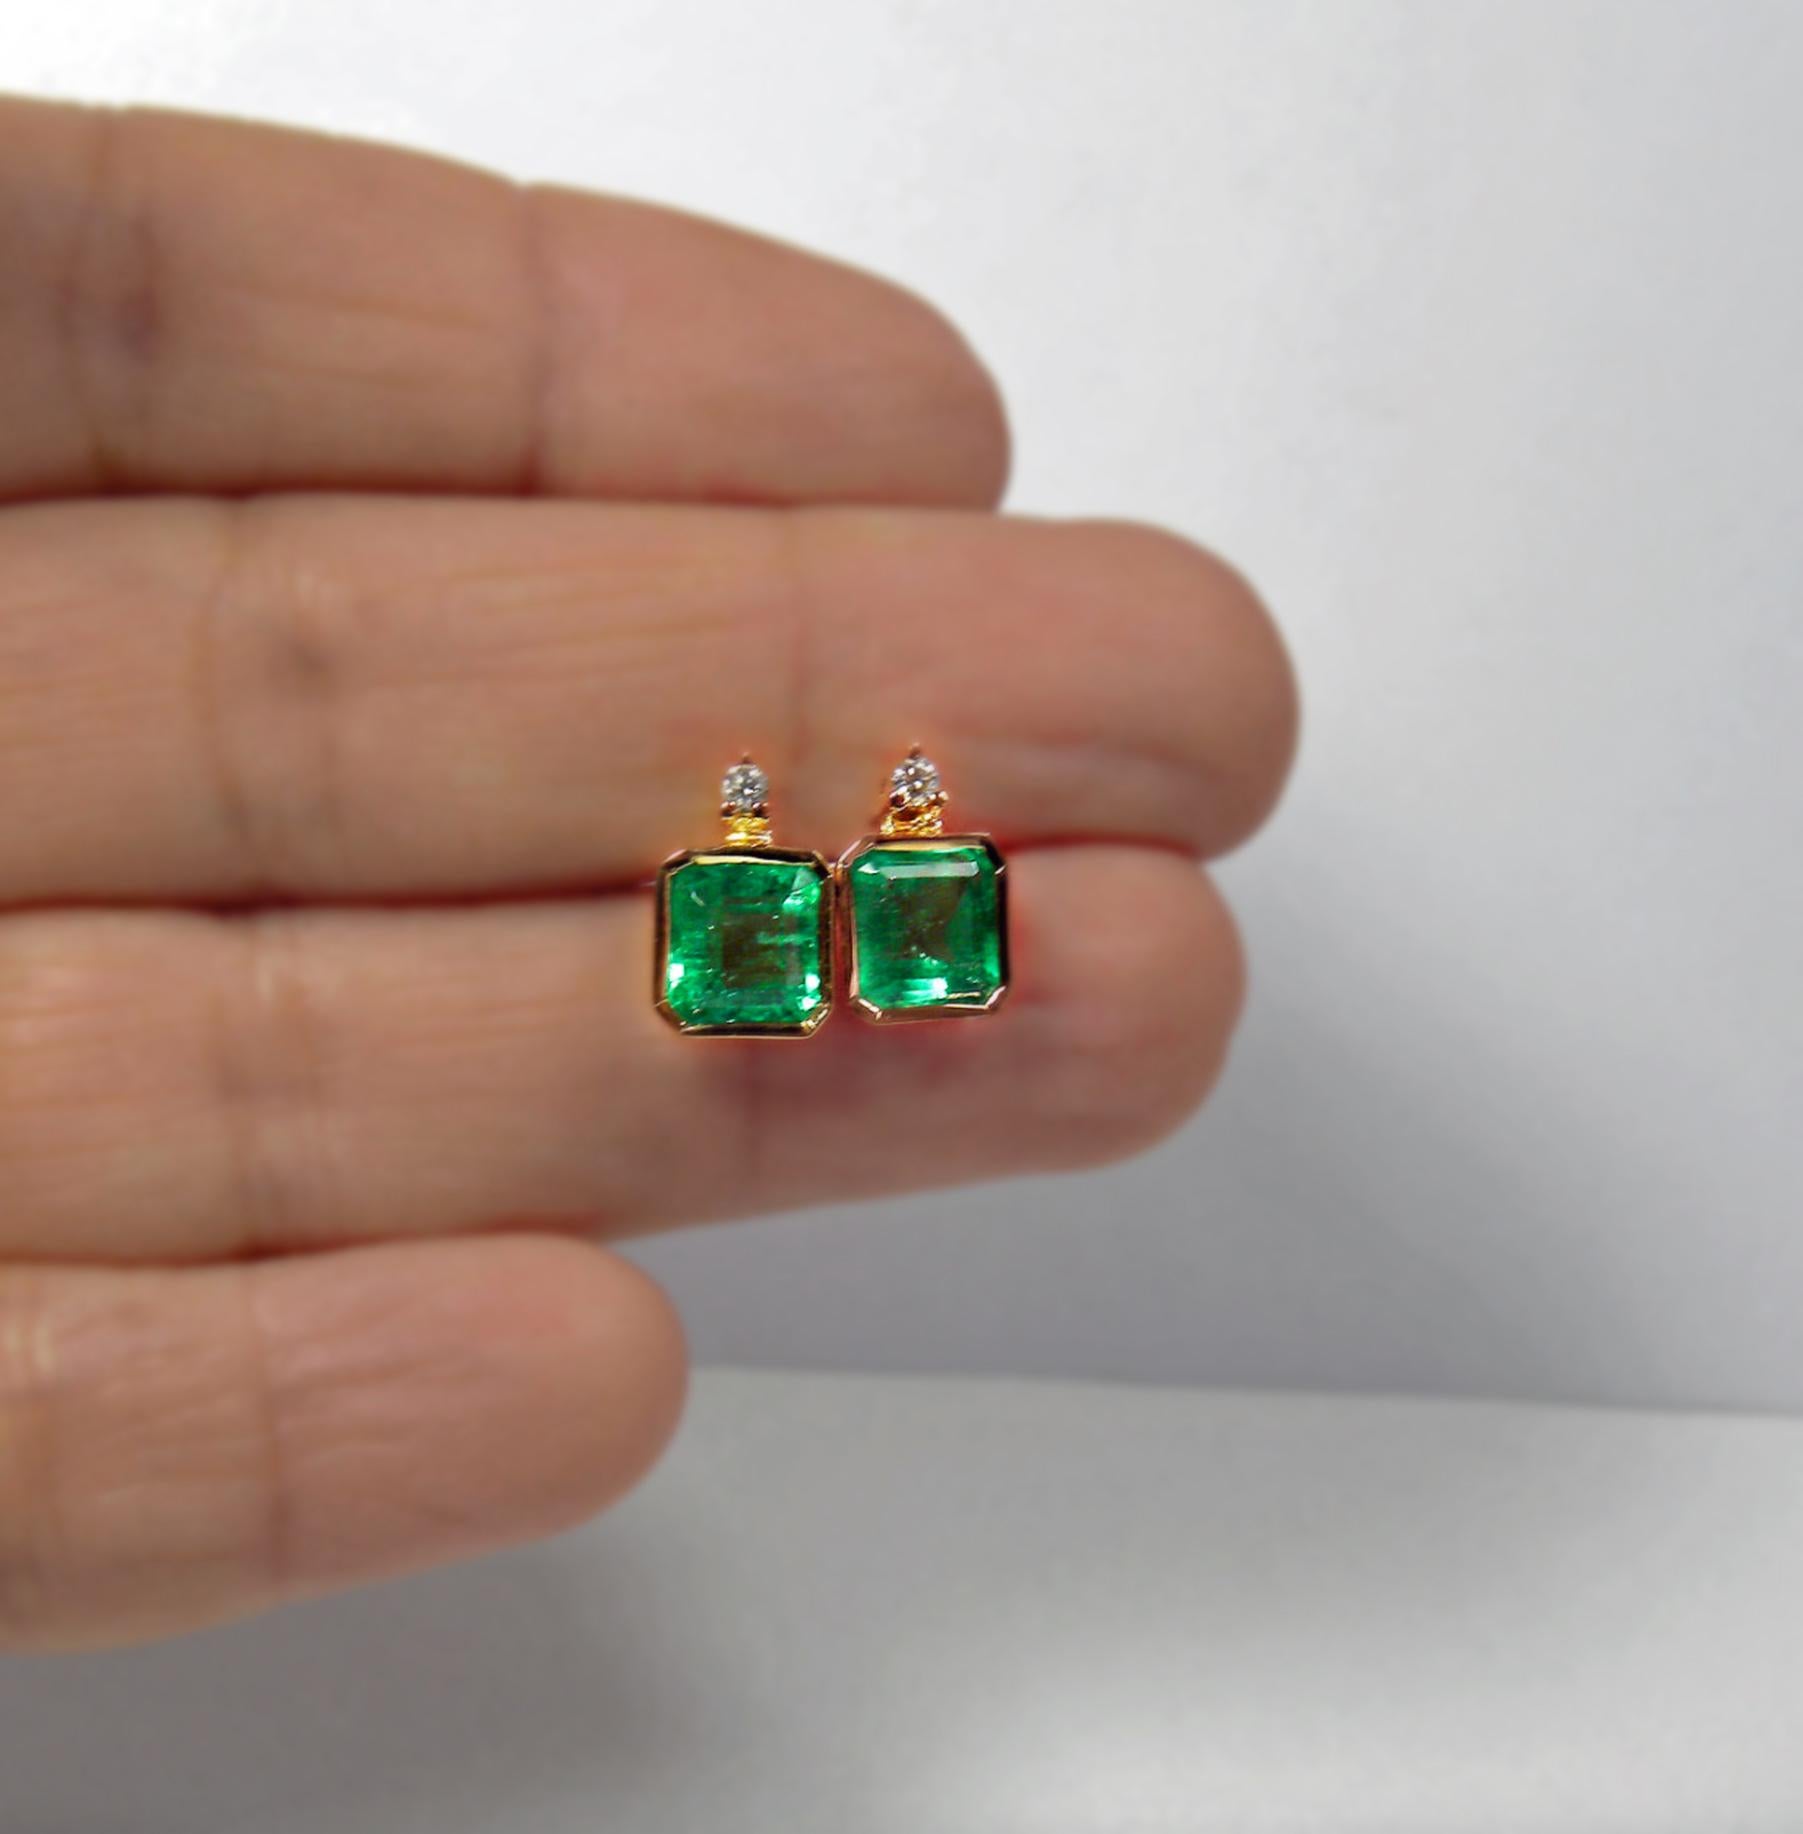 Primary Stones: 100% Natural Colombian Emeralds 
Average Color/Clarity : AAA Medium Green Color/ Clarity, VS
Total Weight Emeralds: 3.20 Carats (2 emeralds)
Shape or Cut : Emerald Cut
Composition: Rose Gold 18K
Second Stones: 0.06cts Diamonds I-1
